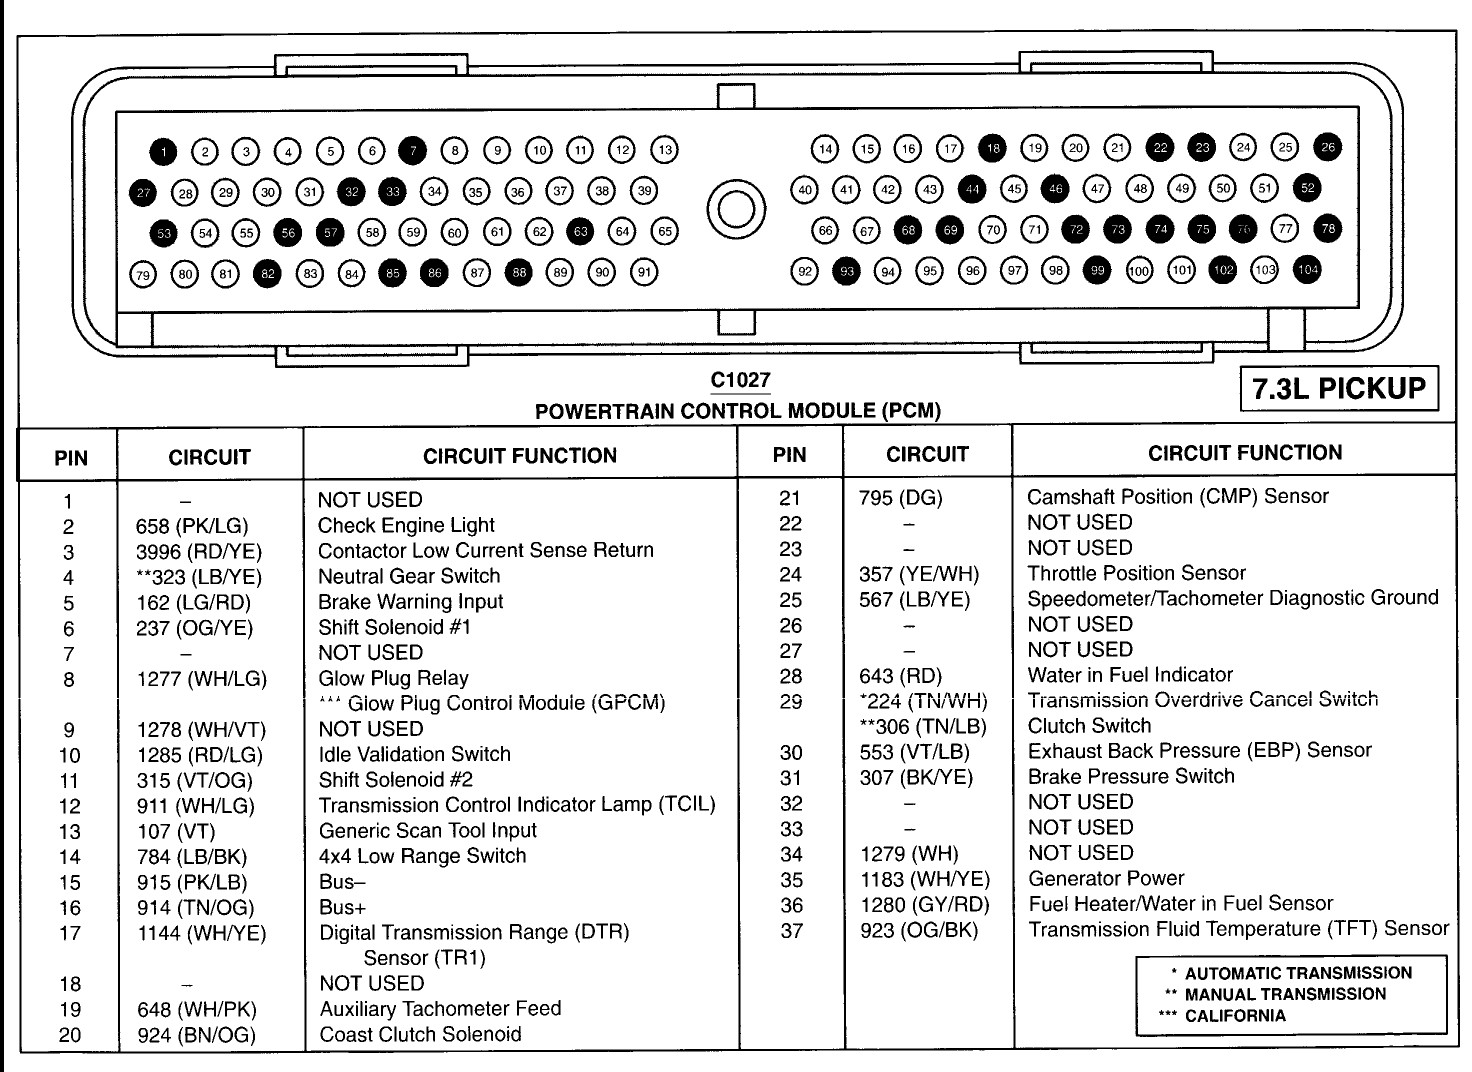 2001 ford Pcm 4.2 Gas Wiring Diagram I Need to Have A Ecm Wiring Diagram for A 2001 F250 Power Stroke so that I Can Find the Crank Of 2001 ford Pcm 4.2 Gas Wiring Diagram